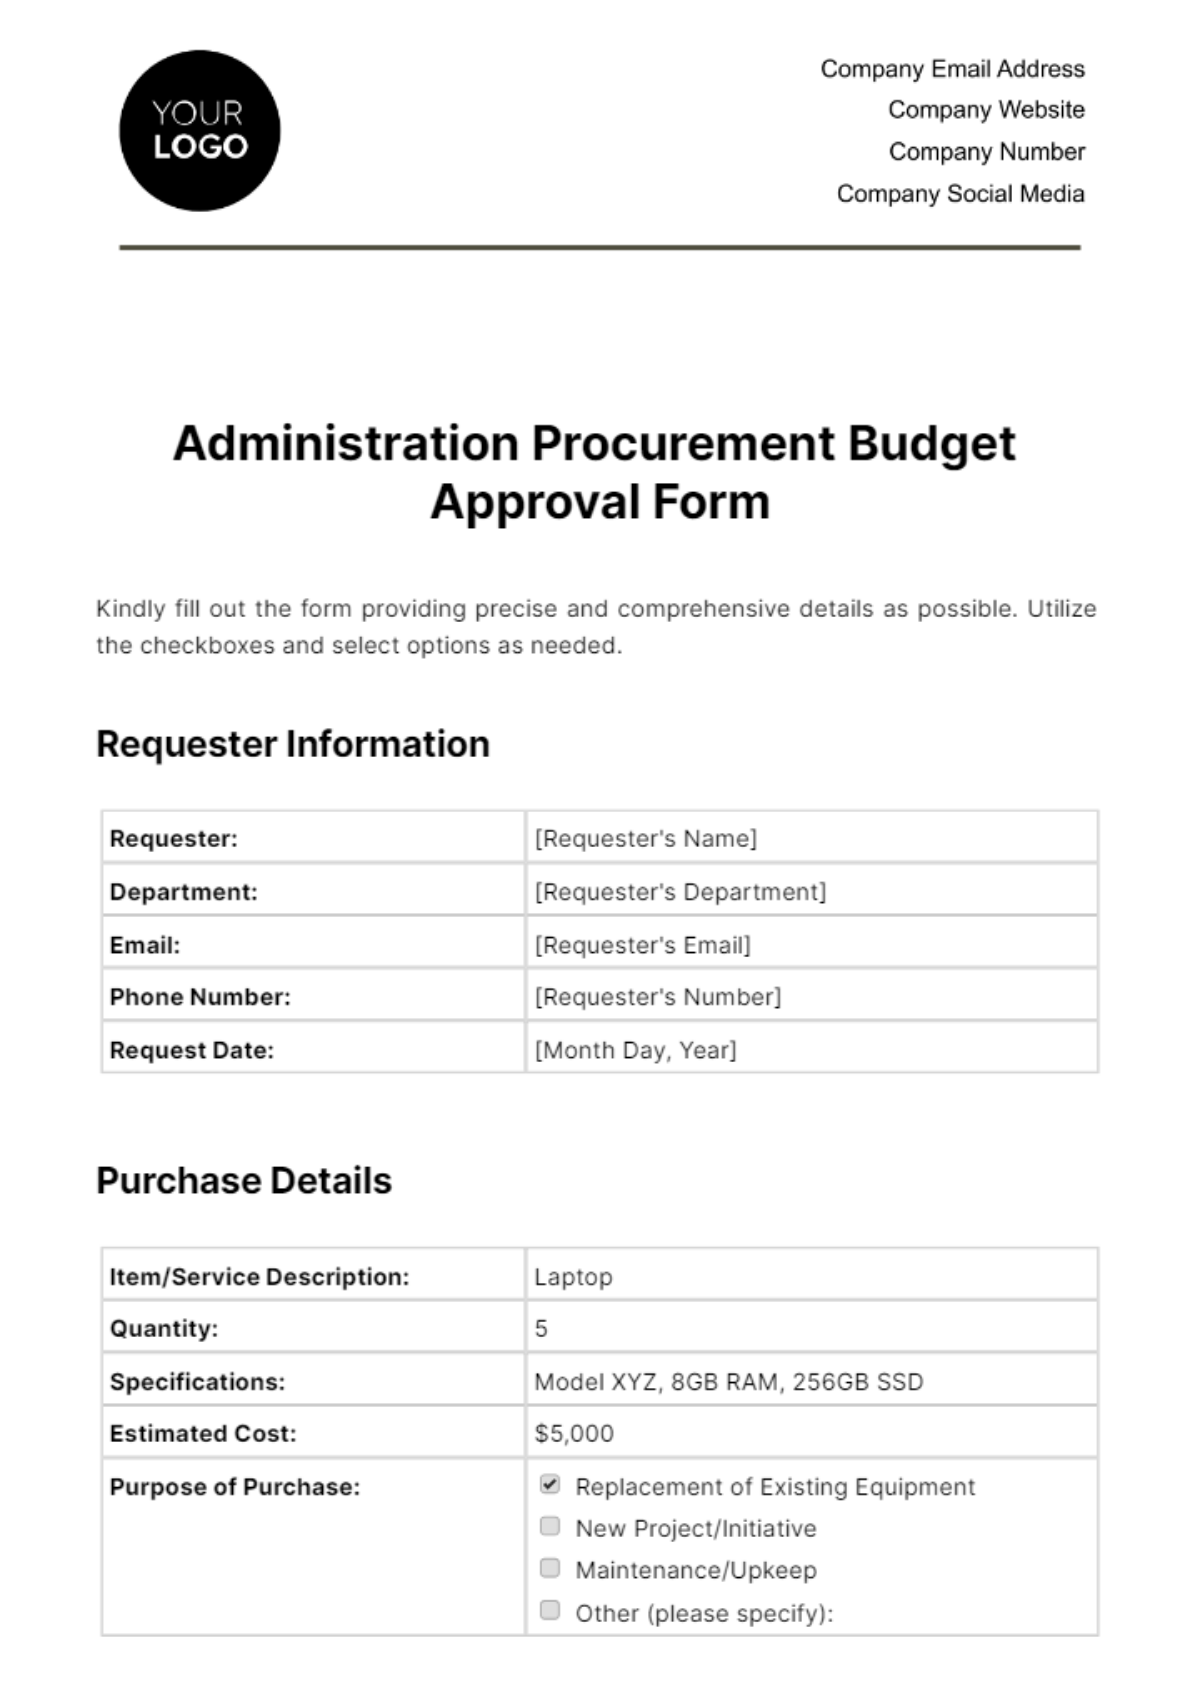 Free Administration Procurement Budget Approval Form Template